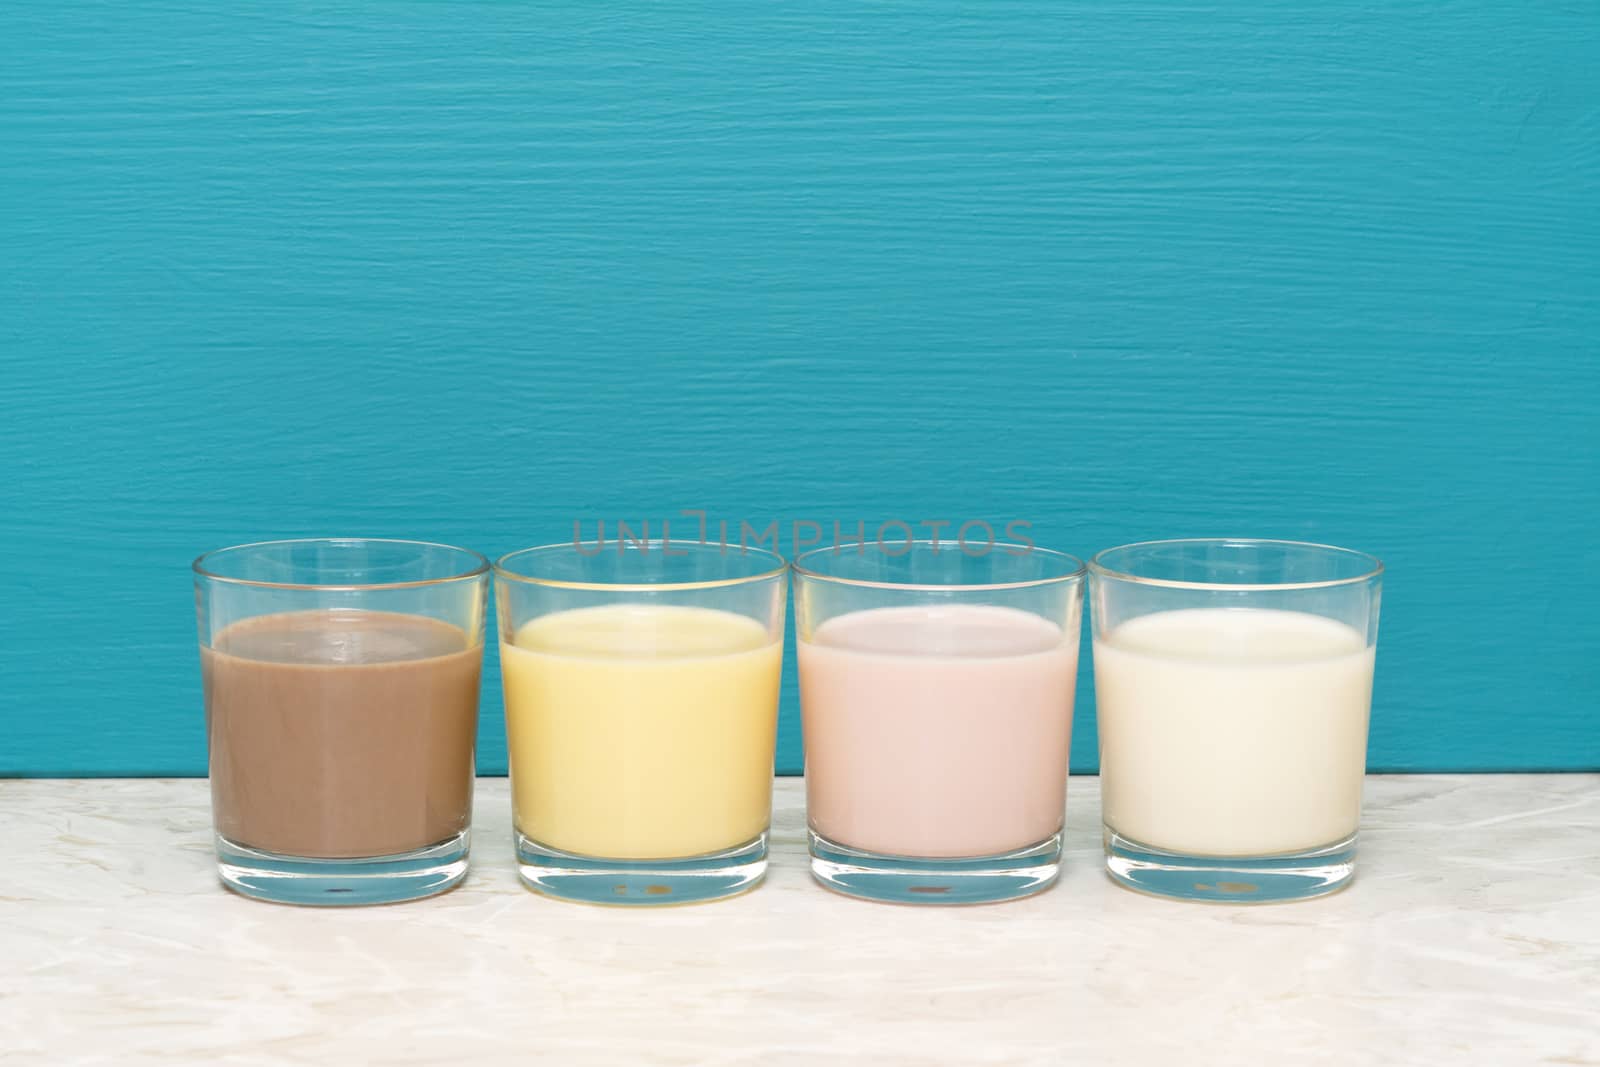 Chocolate, banana and strawberry milkshakes and fresh milk in glass tumblers against a teal background